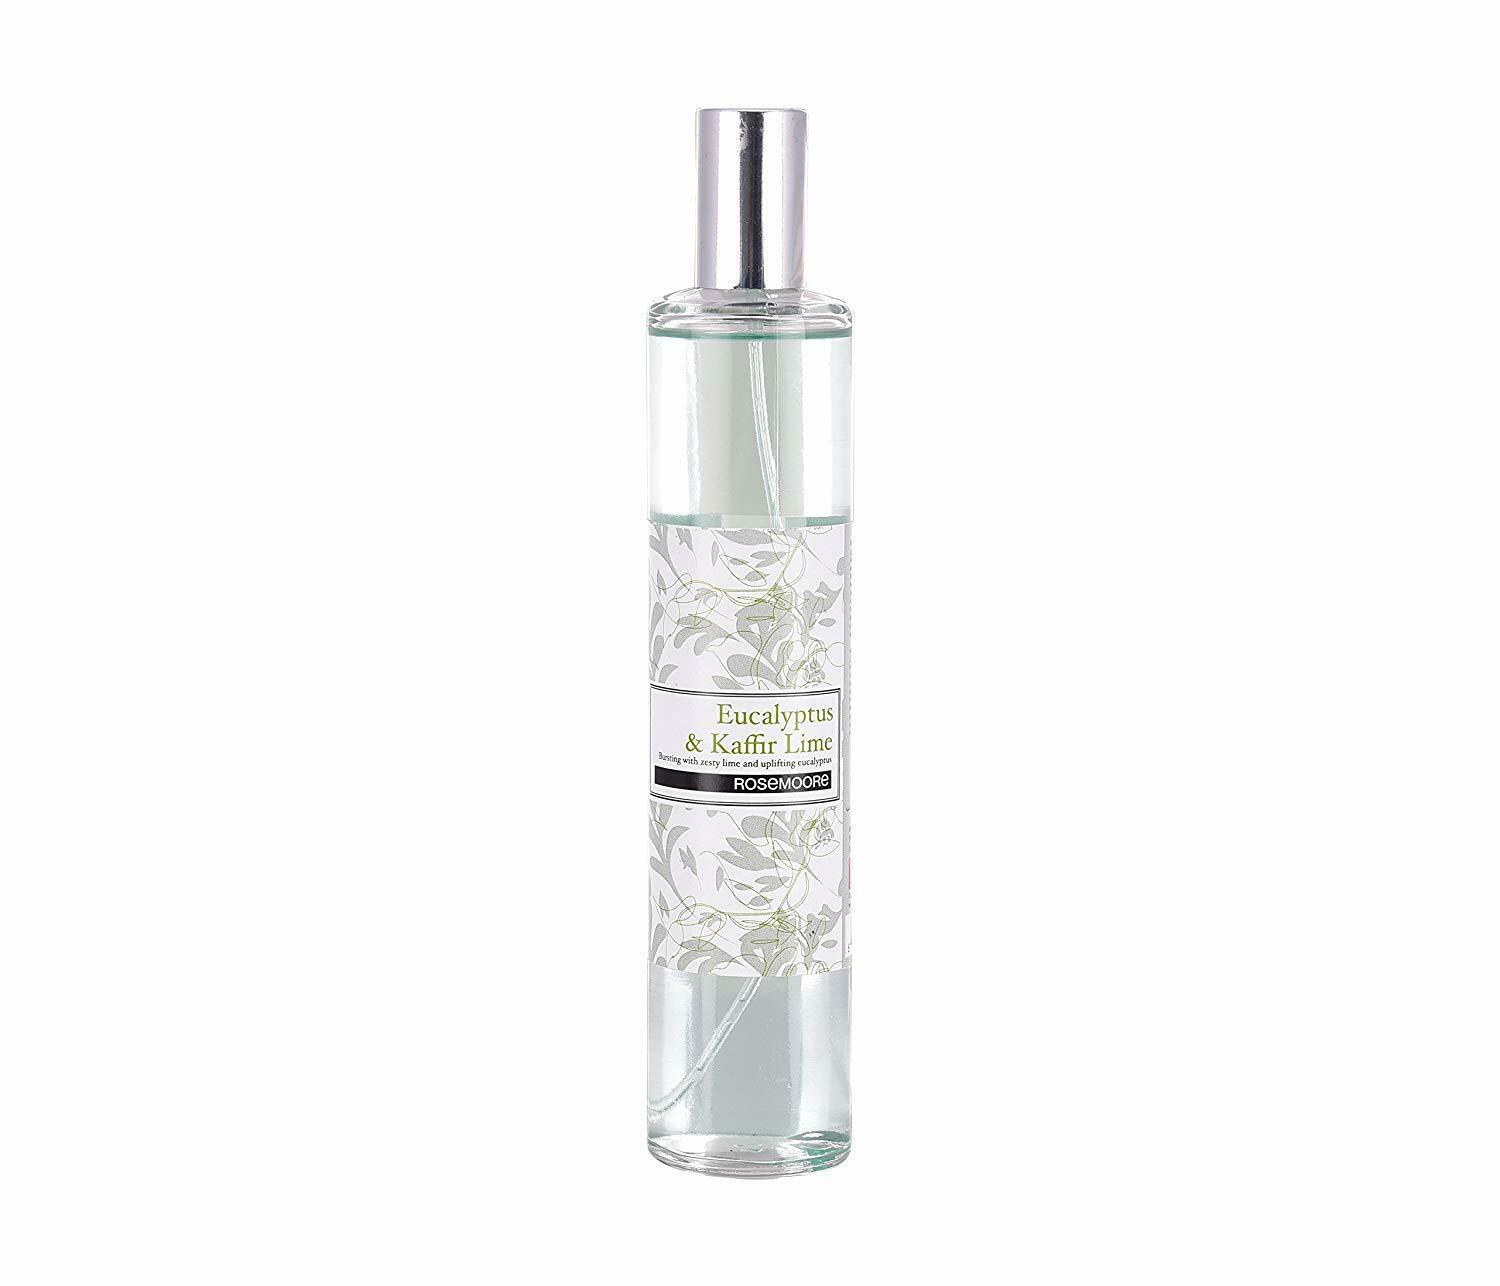 Buy Rosemoore Eucalyptus  Kaffir Lime Home Scent Room Spray in Delhi,  India at healthwithherbal